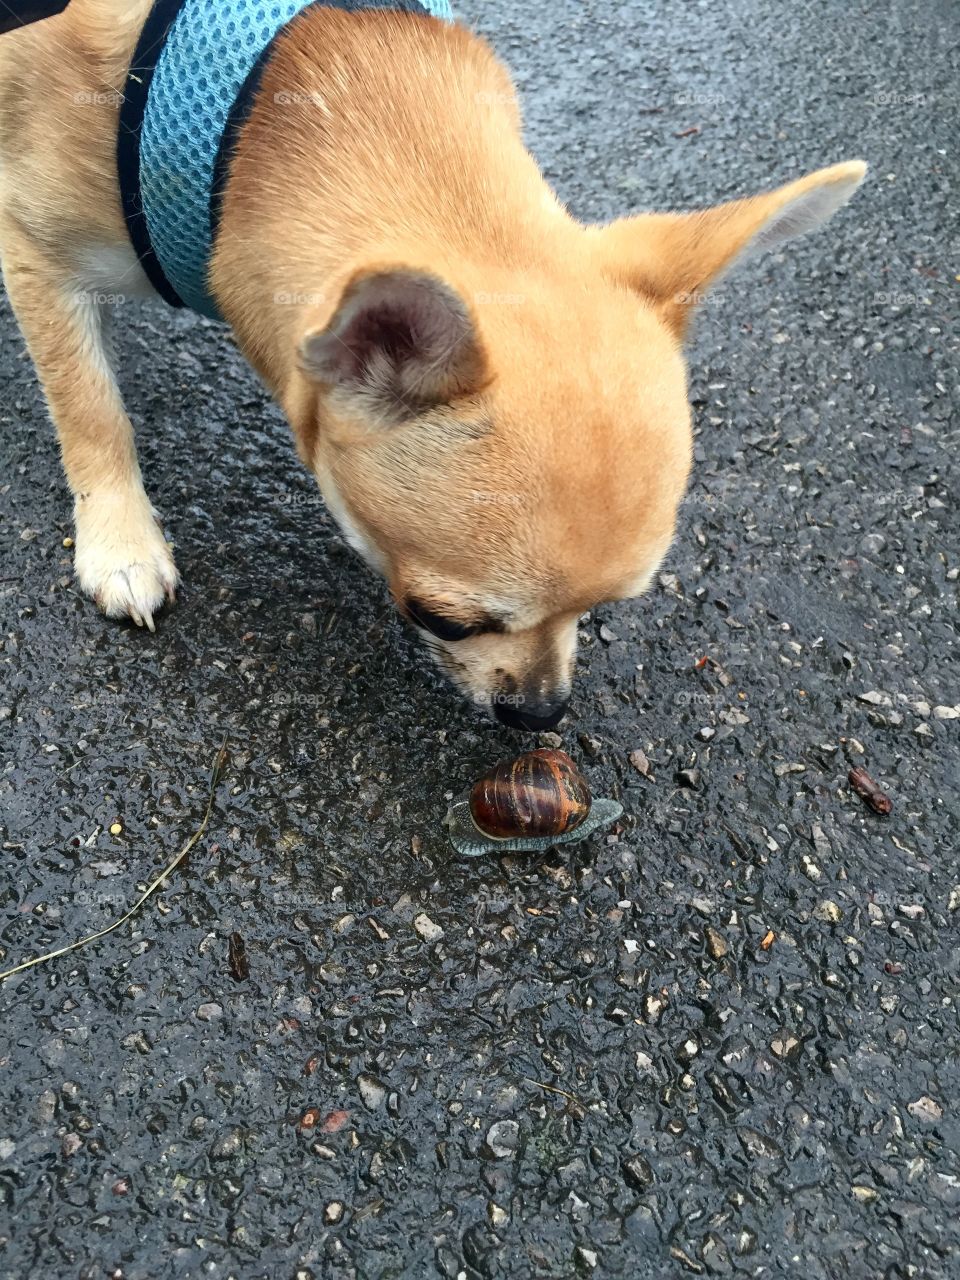 Close-up of a dog and snail